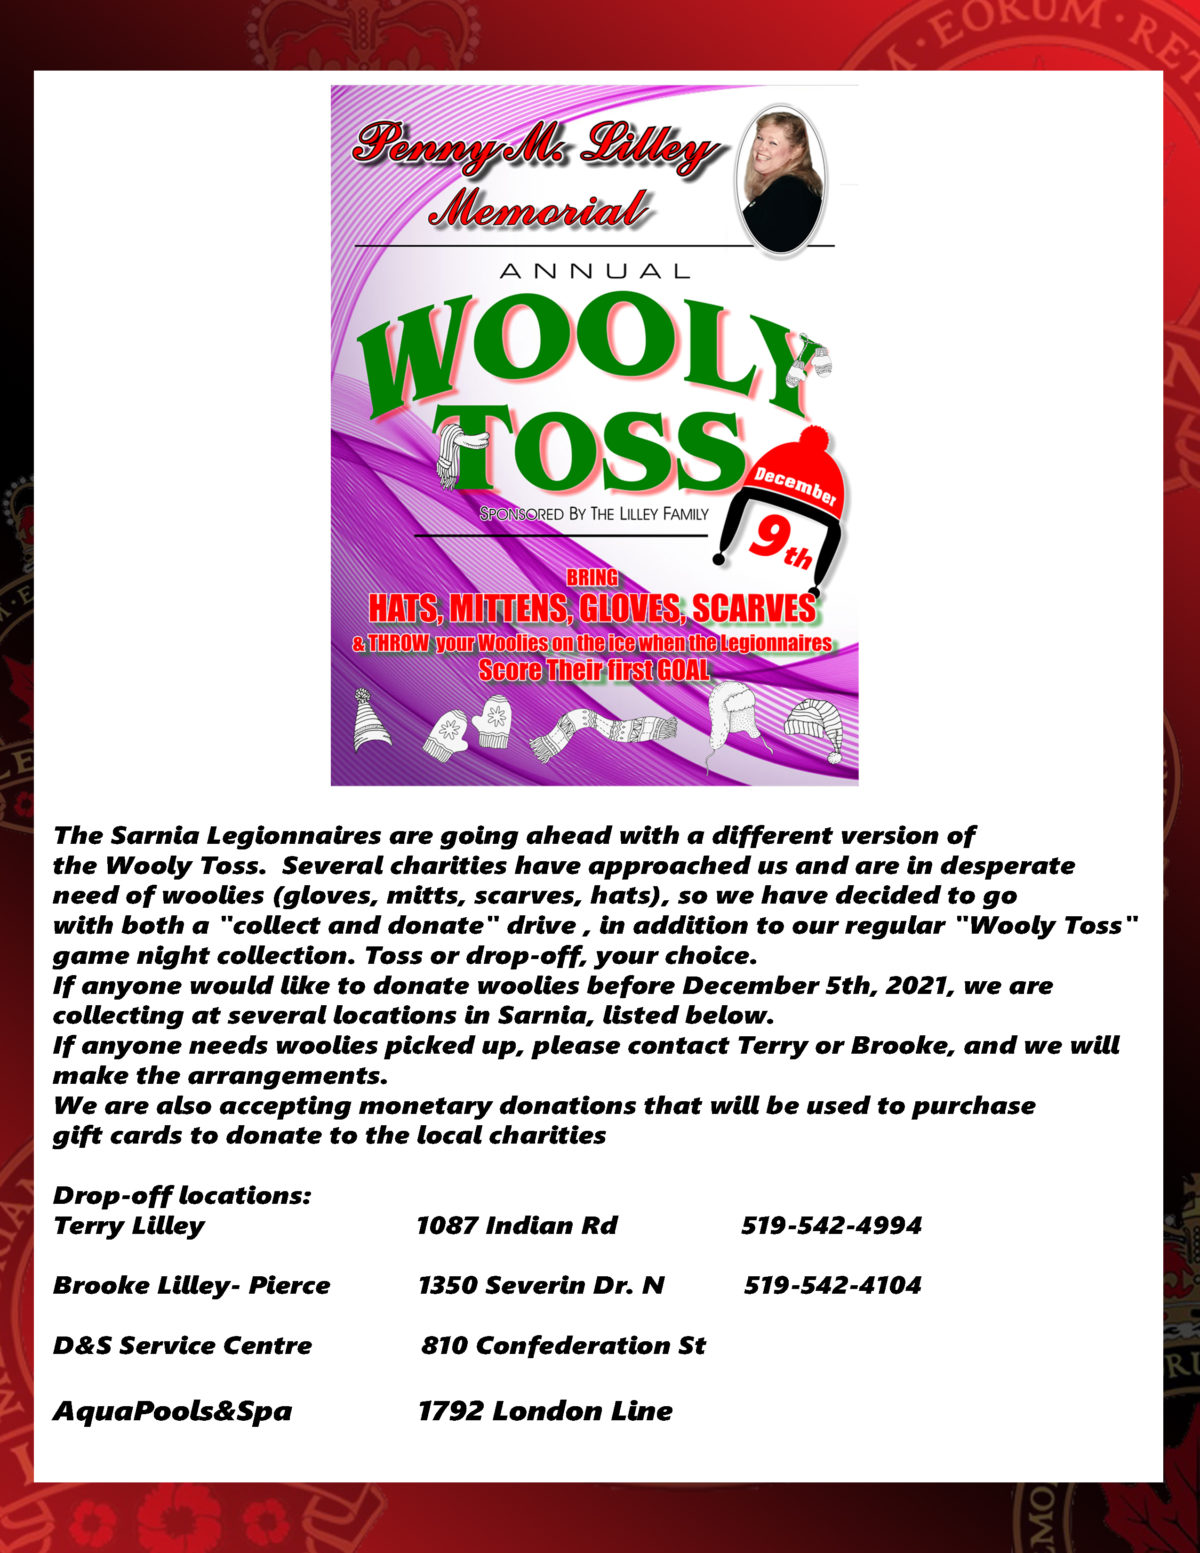 Annual Wooly Toss – December 9th